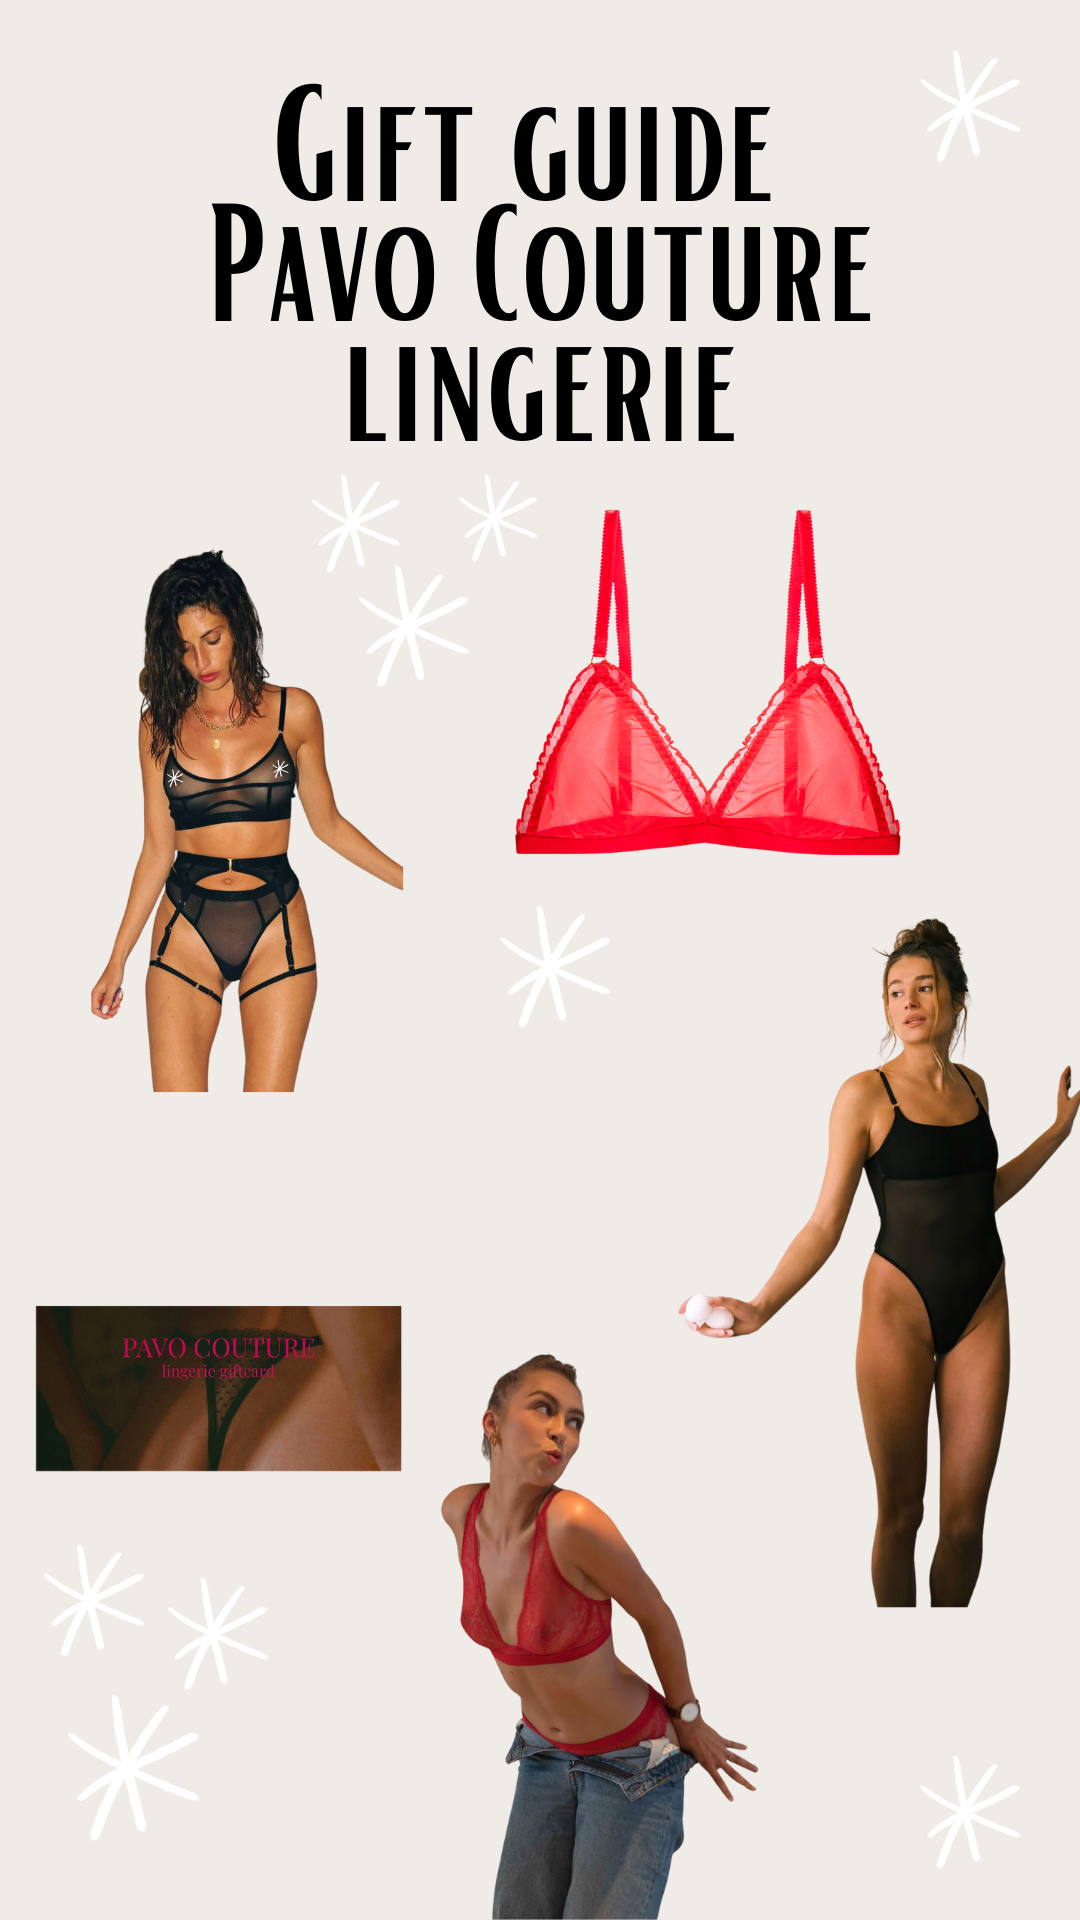 Gift guide- Pavo Couture lingerie gift